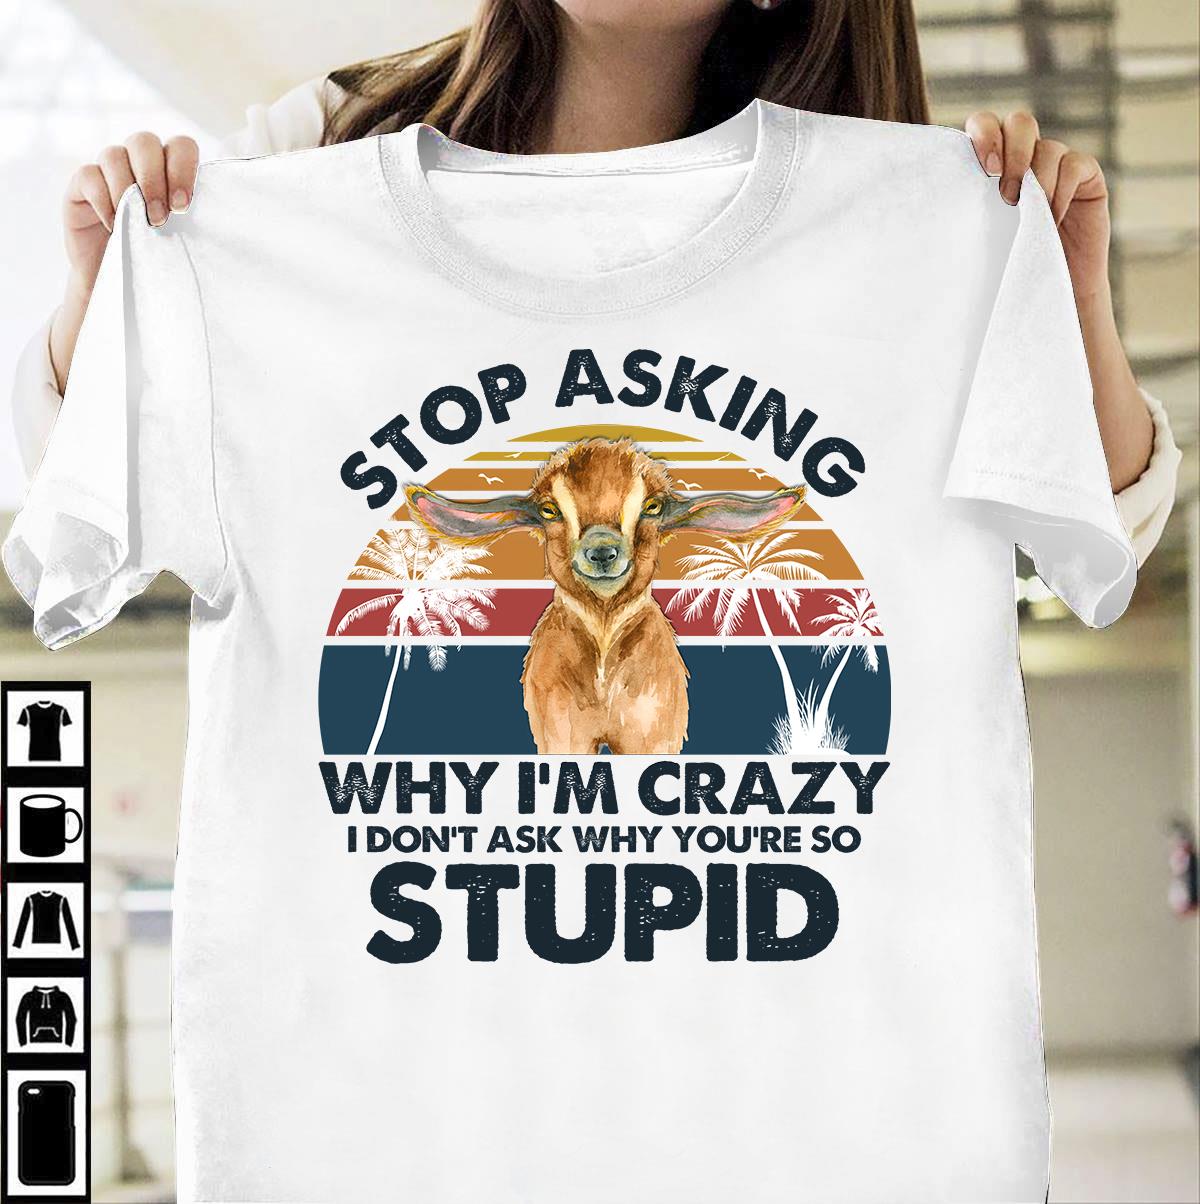 Stop asking why I'm crazy I don't ask why you're so stupid - Grumpy goat